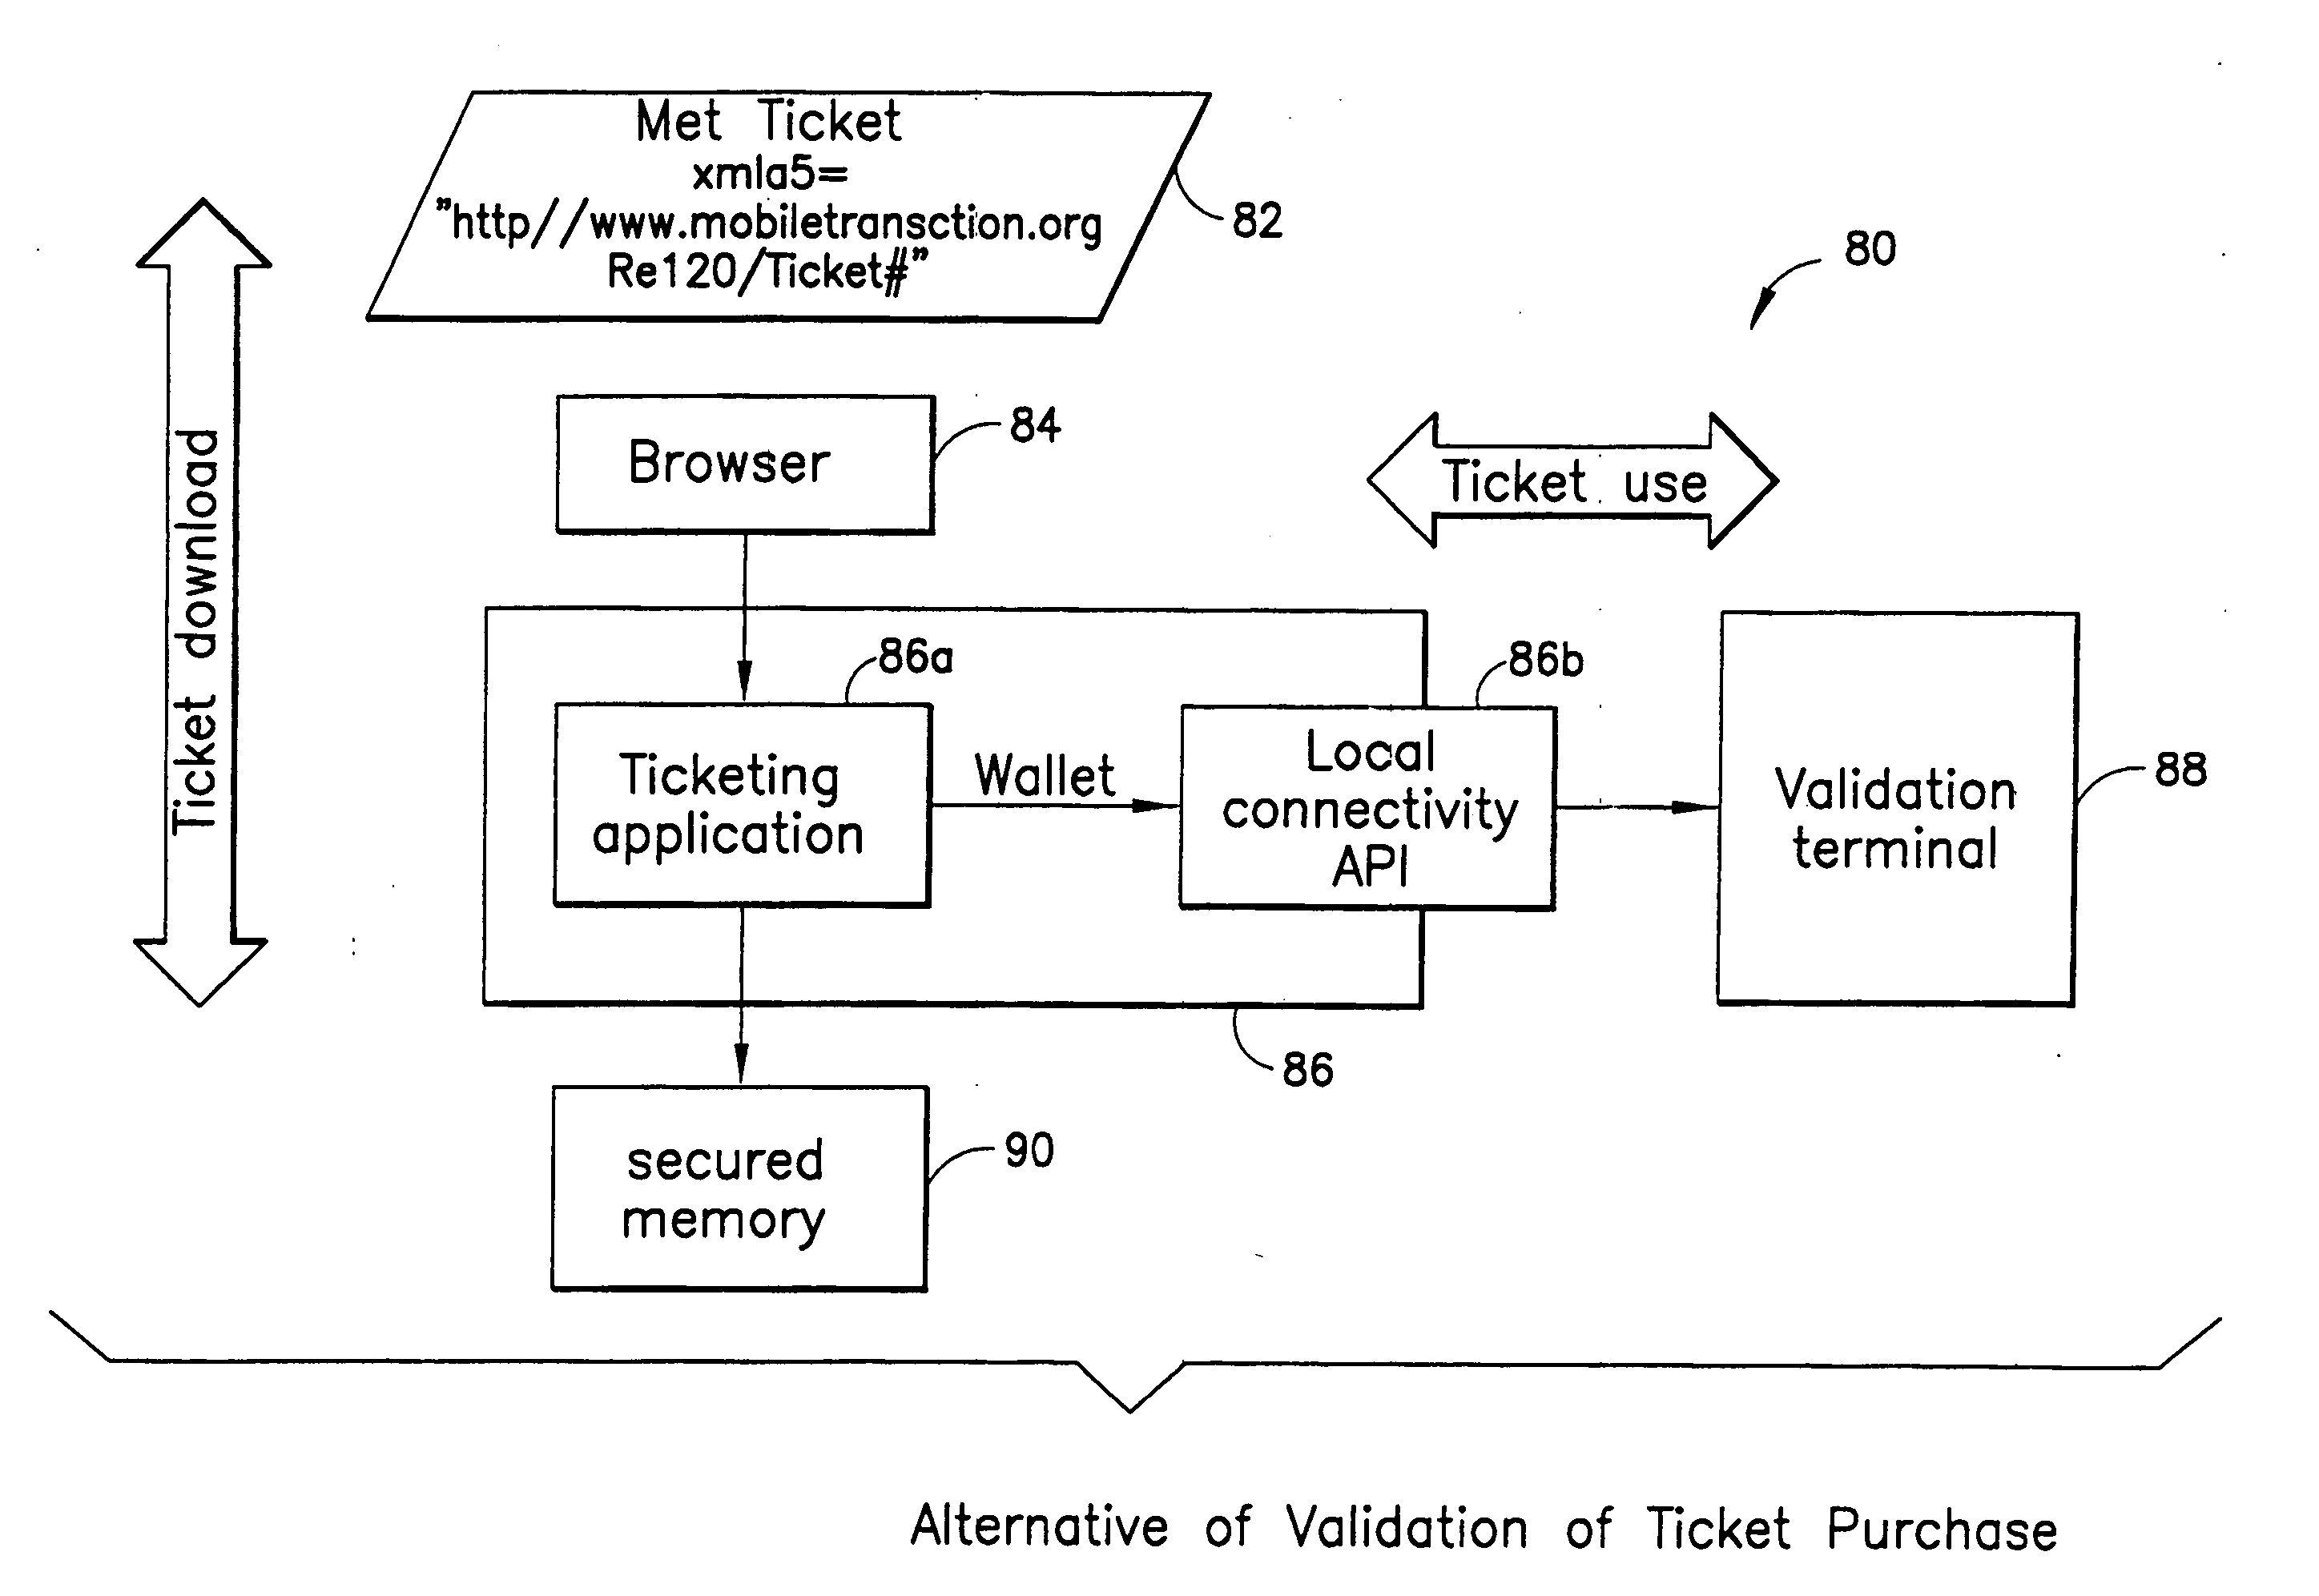 Active ticket with dynamic characteristic such as appearance with various validation options